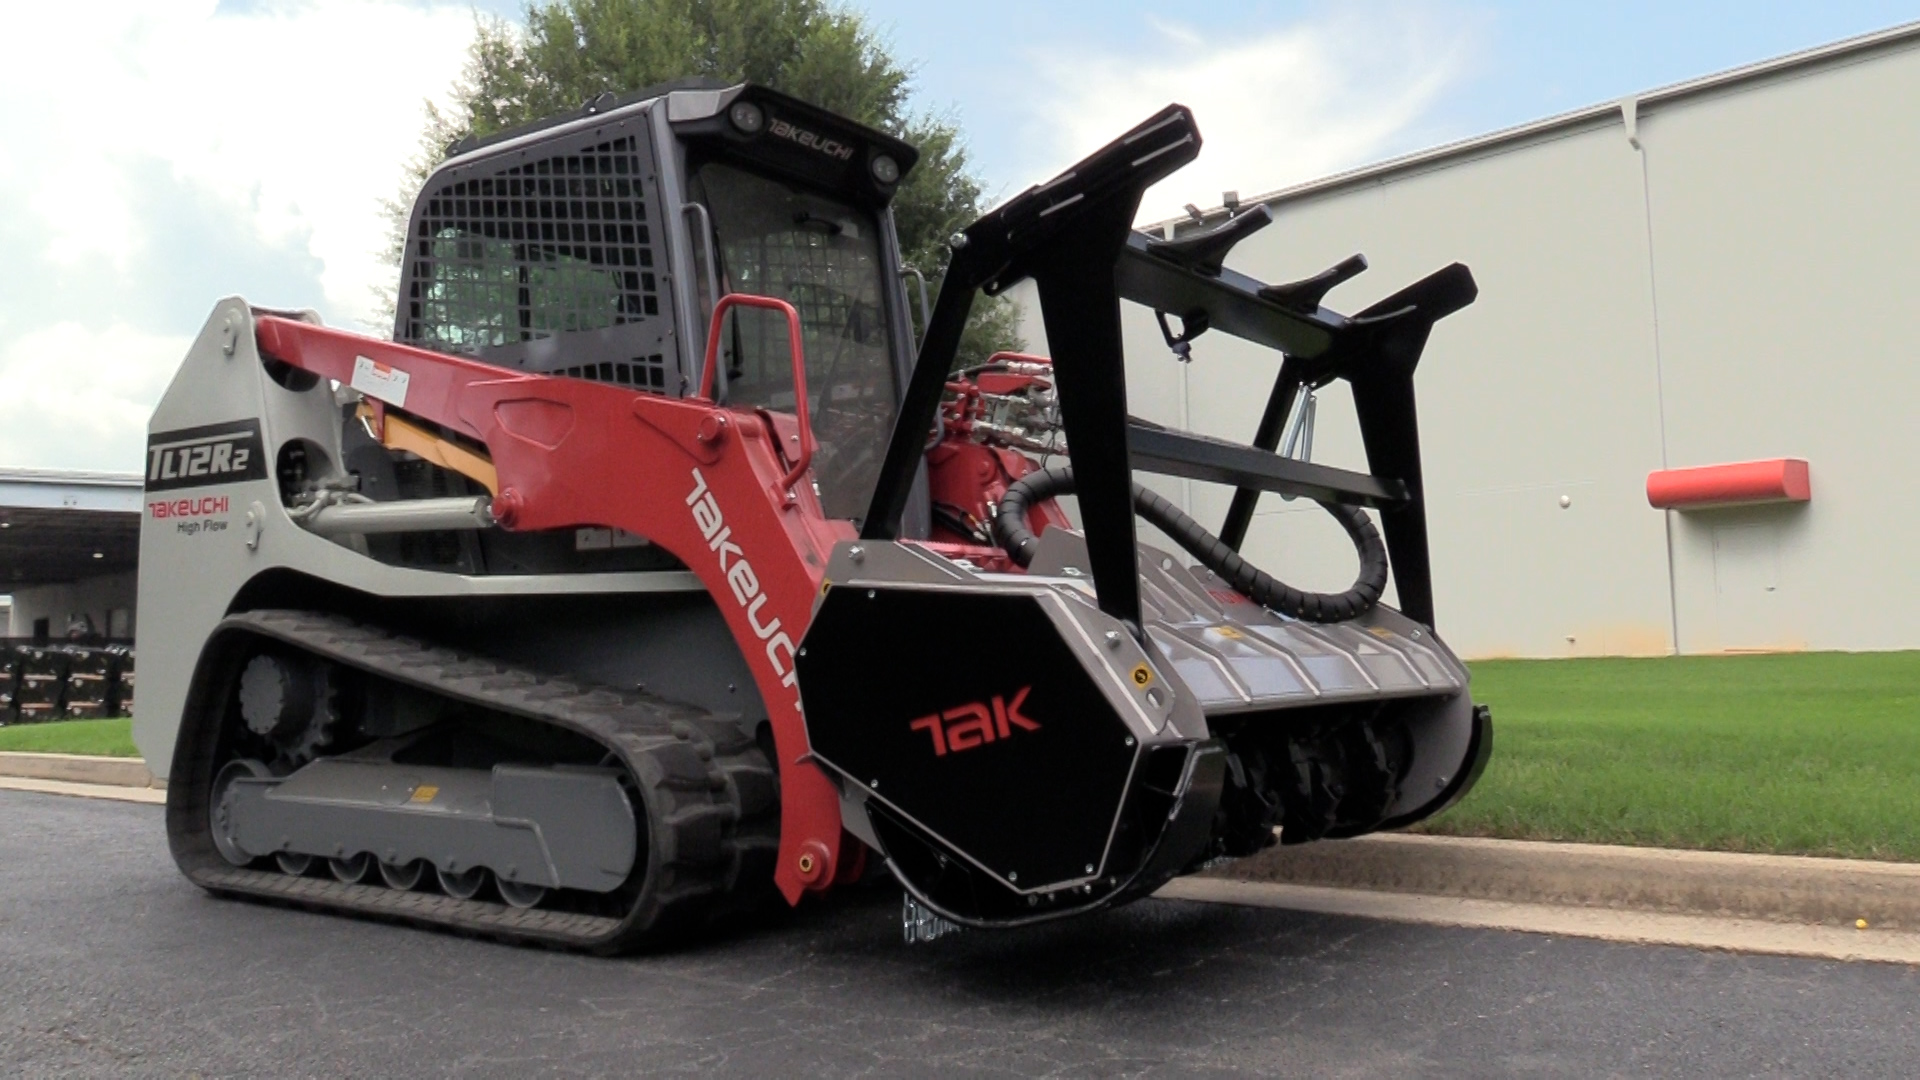 Takeuchi TUML forestry mulcher compact track loader